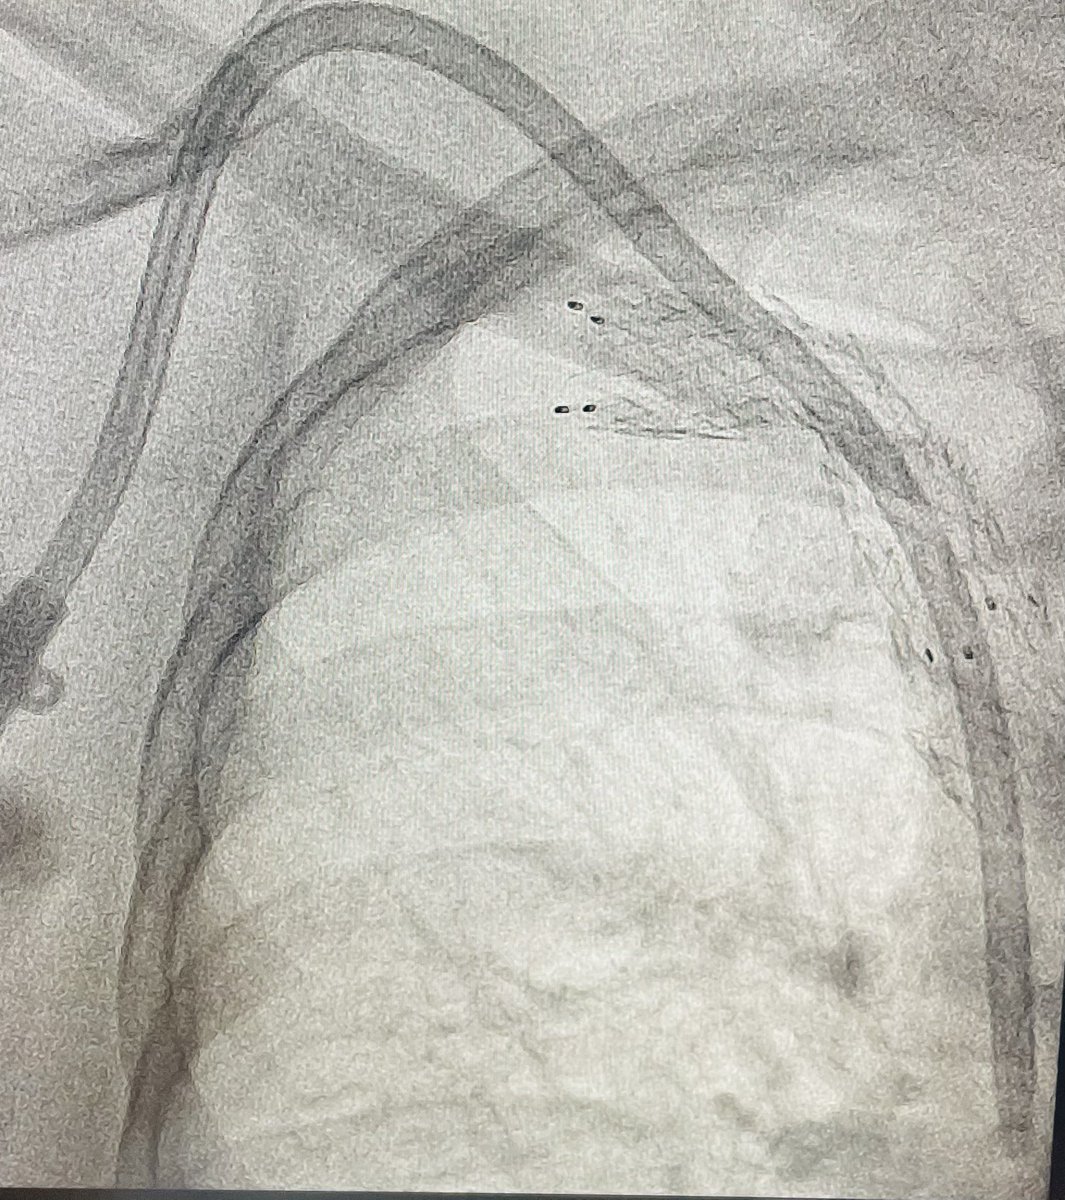 Where there's a will there's a way .Placing a permcath via a blocked SCV stent ( which wasnt placed by me)😀
#vascular #svsvascular #renalfailure #dialysis